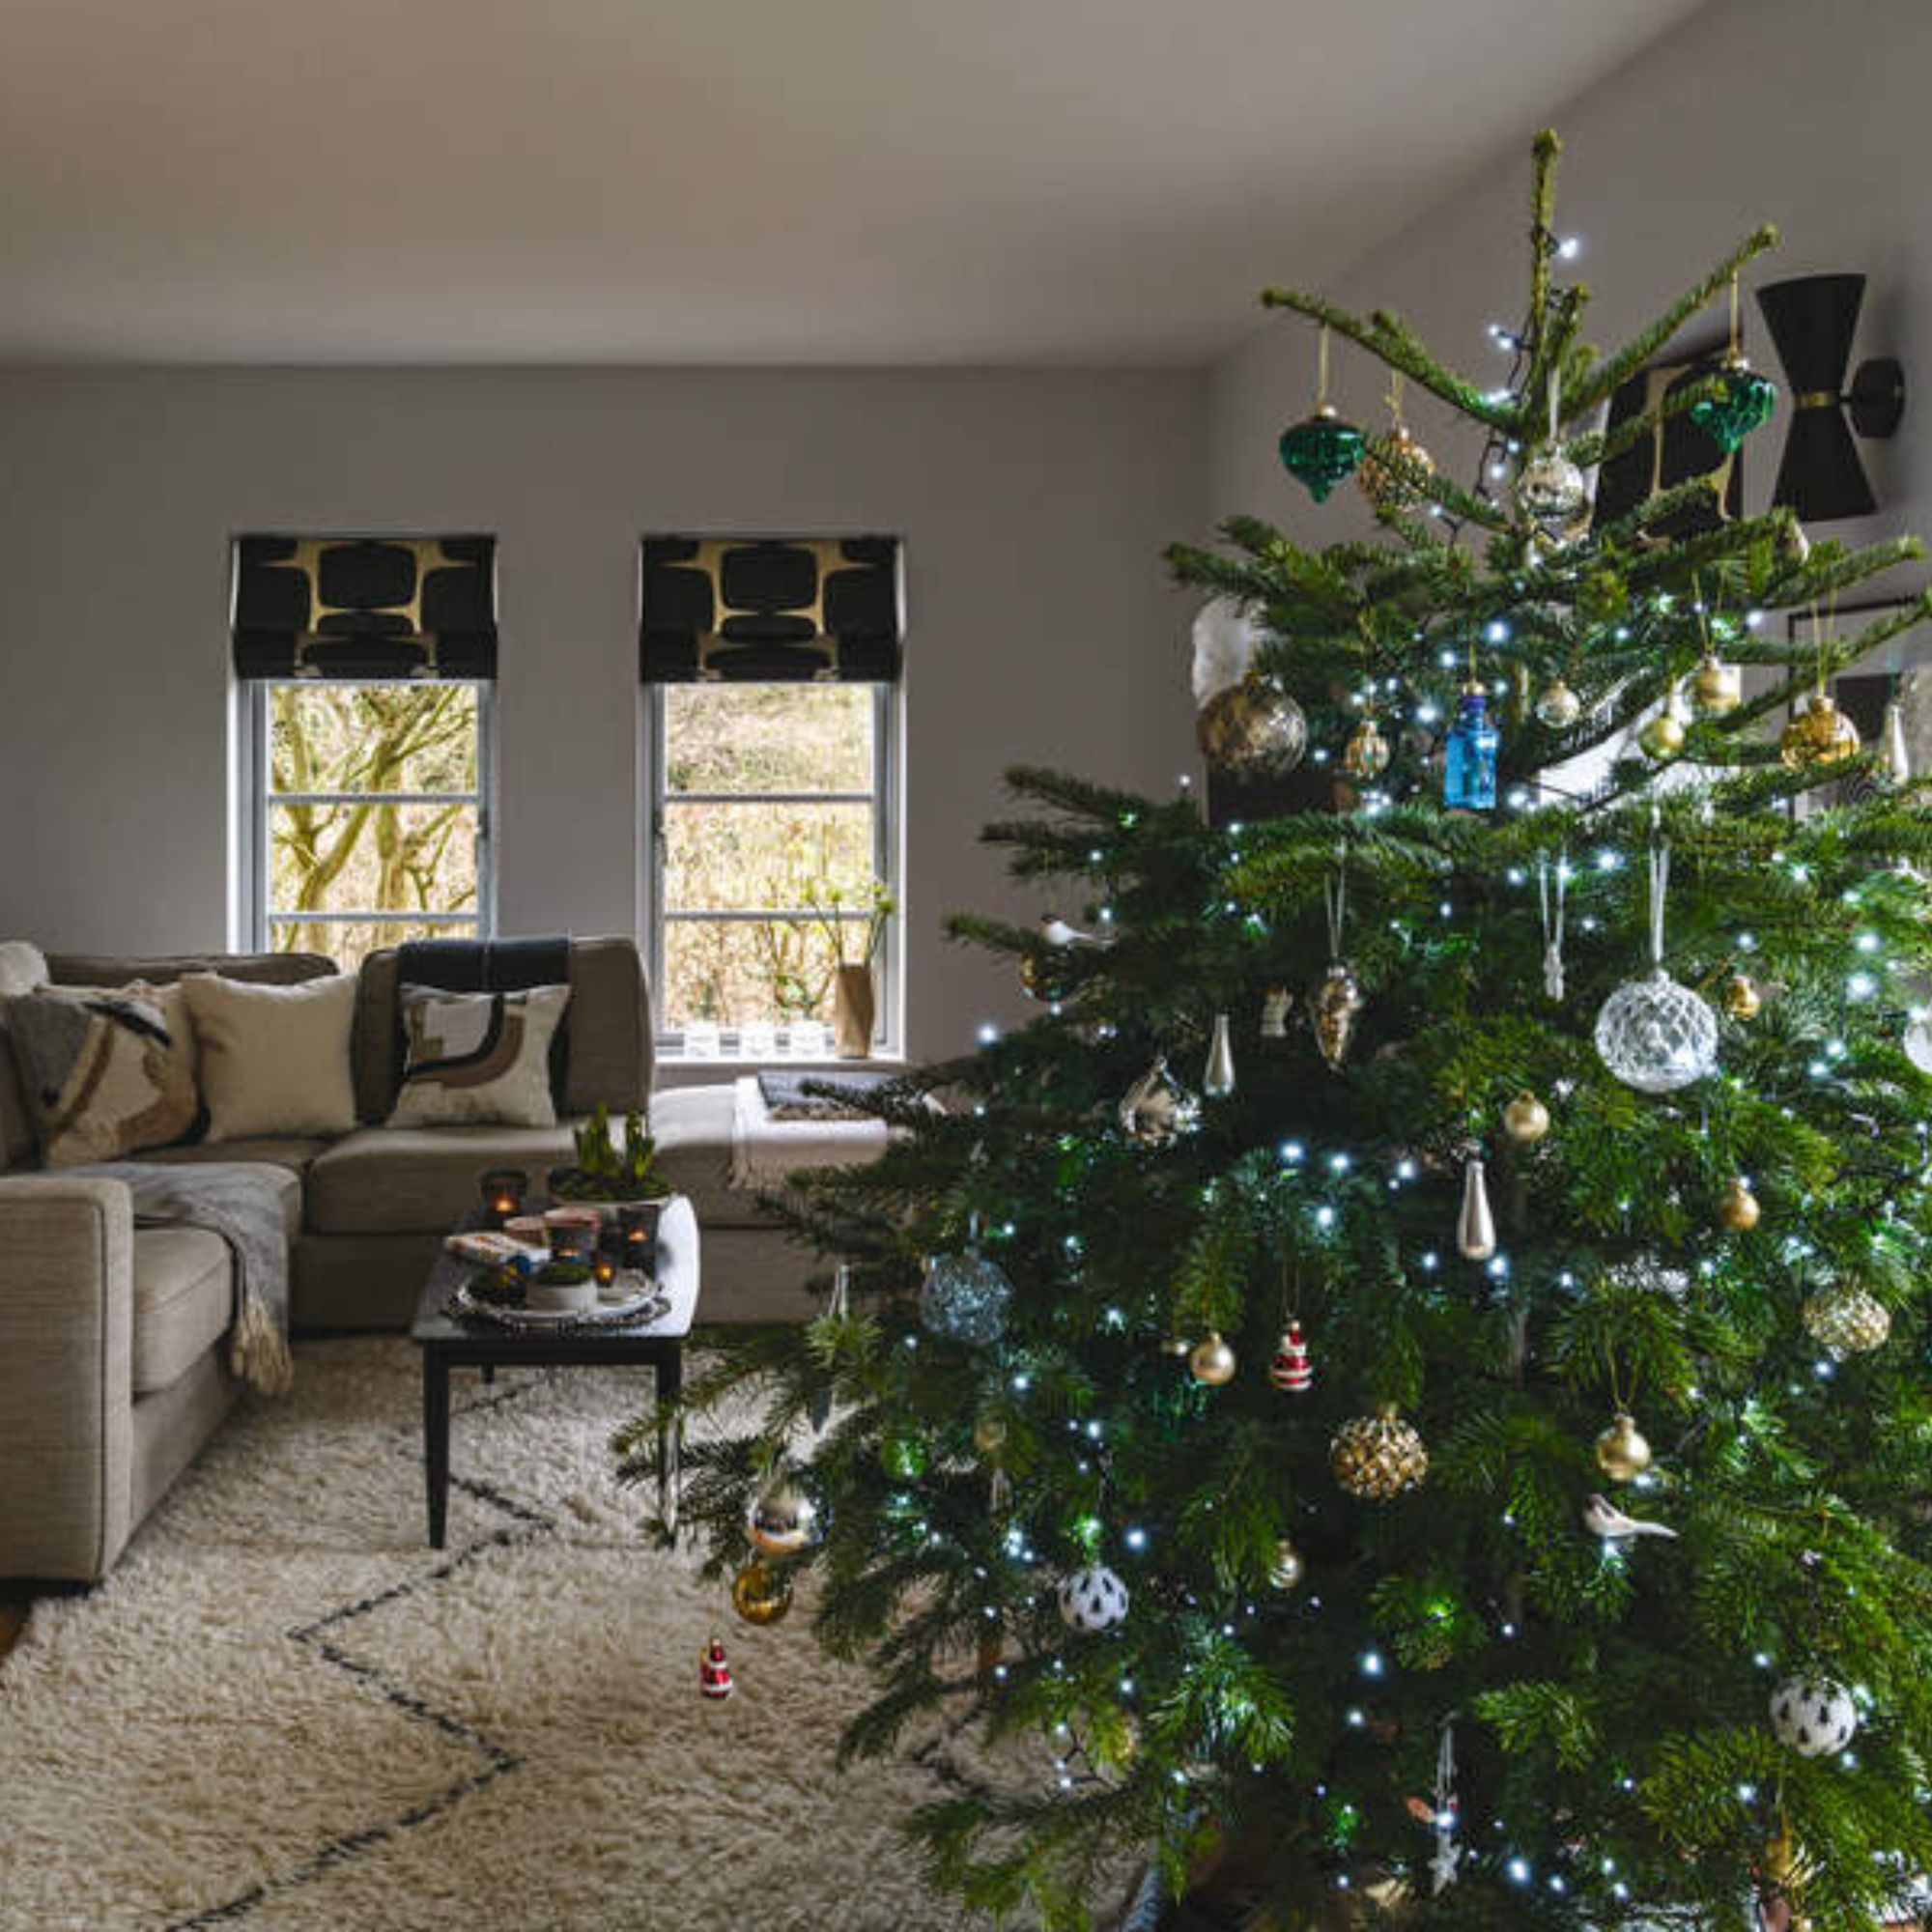 How To Decorate A Real Christmas Tree - The Best Tips And Tricks! - Simply  Lovely Living